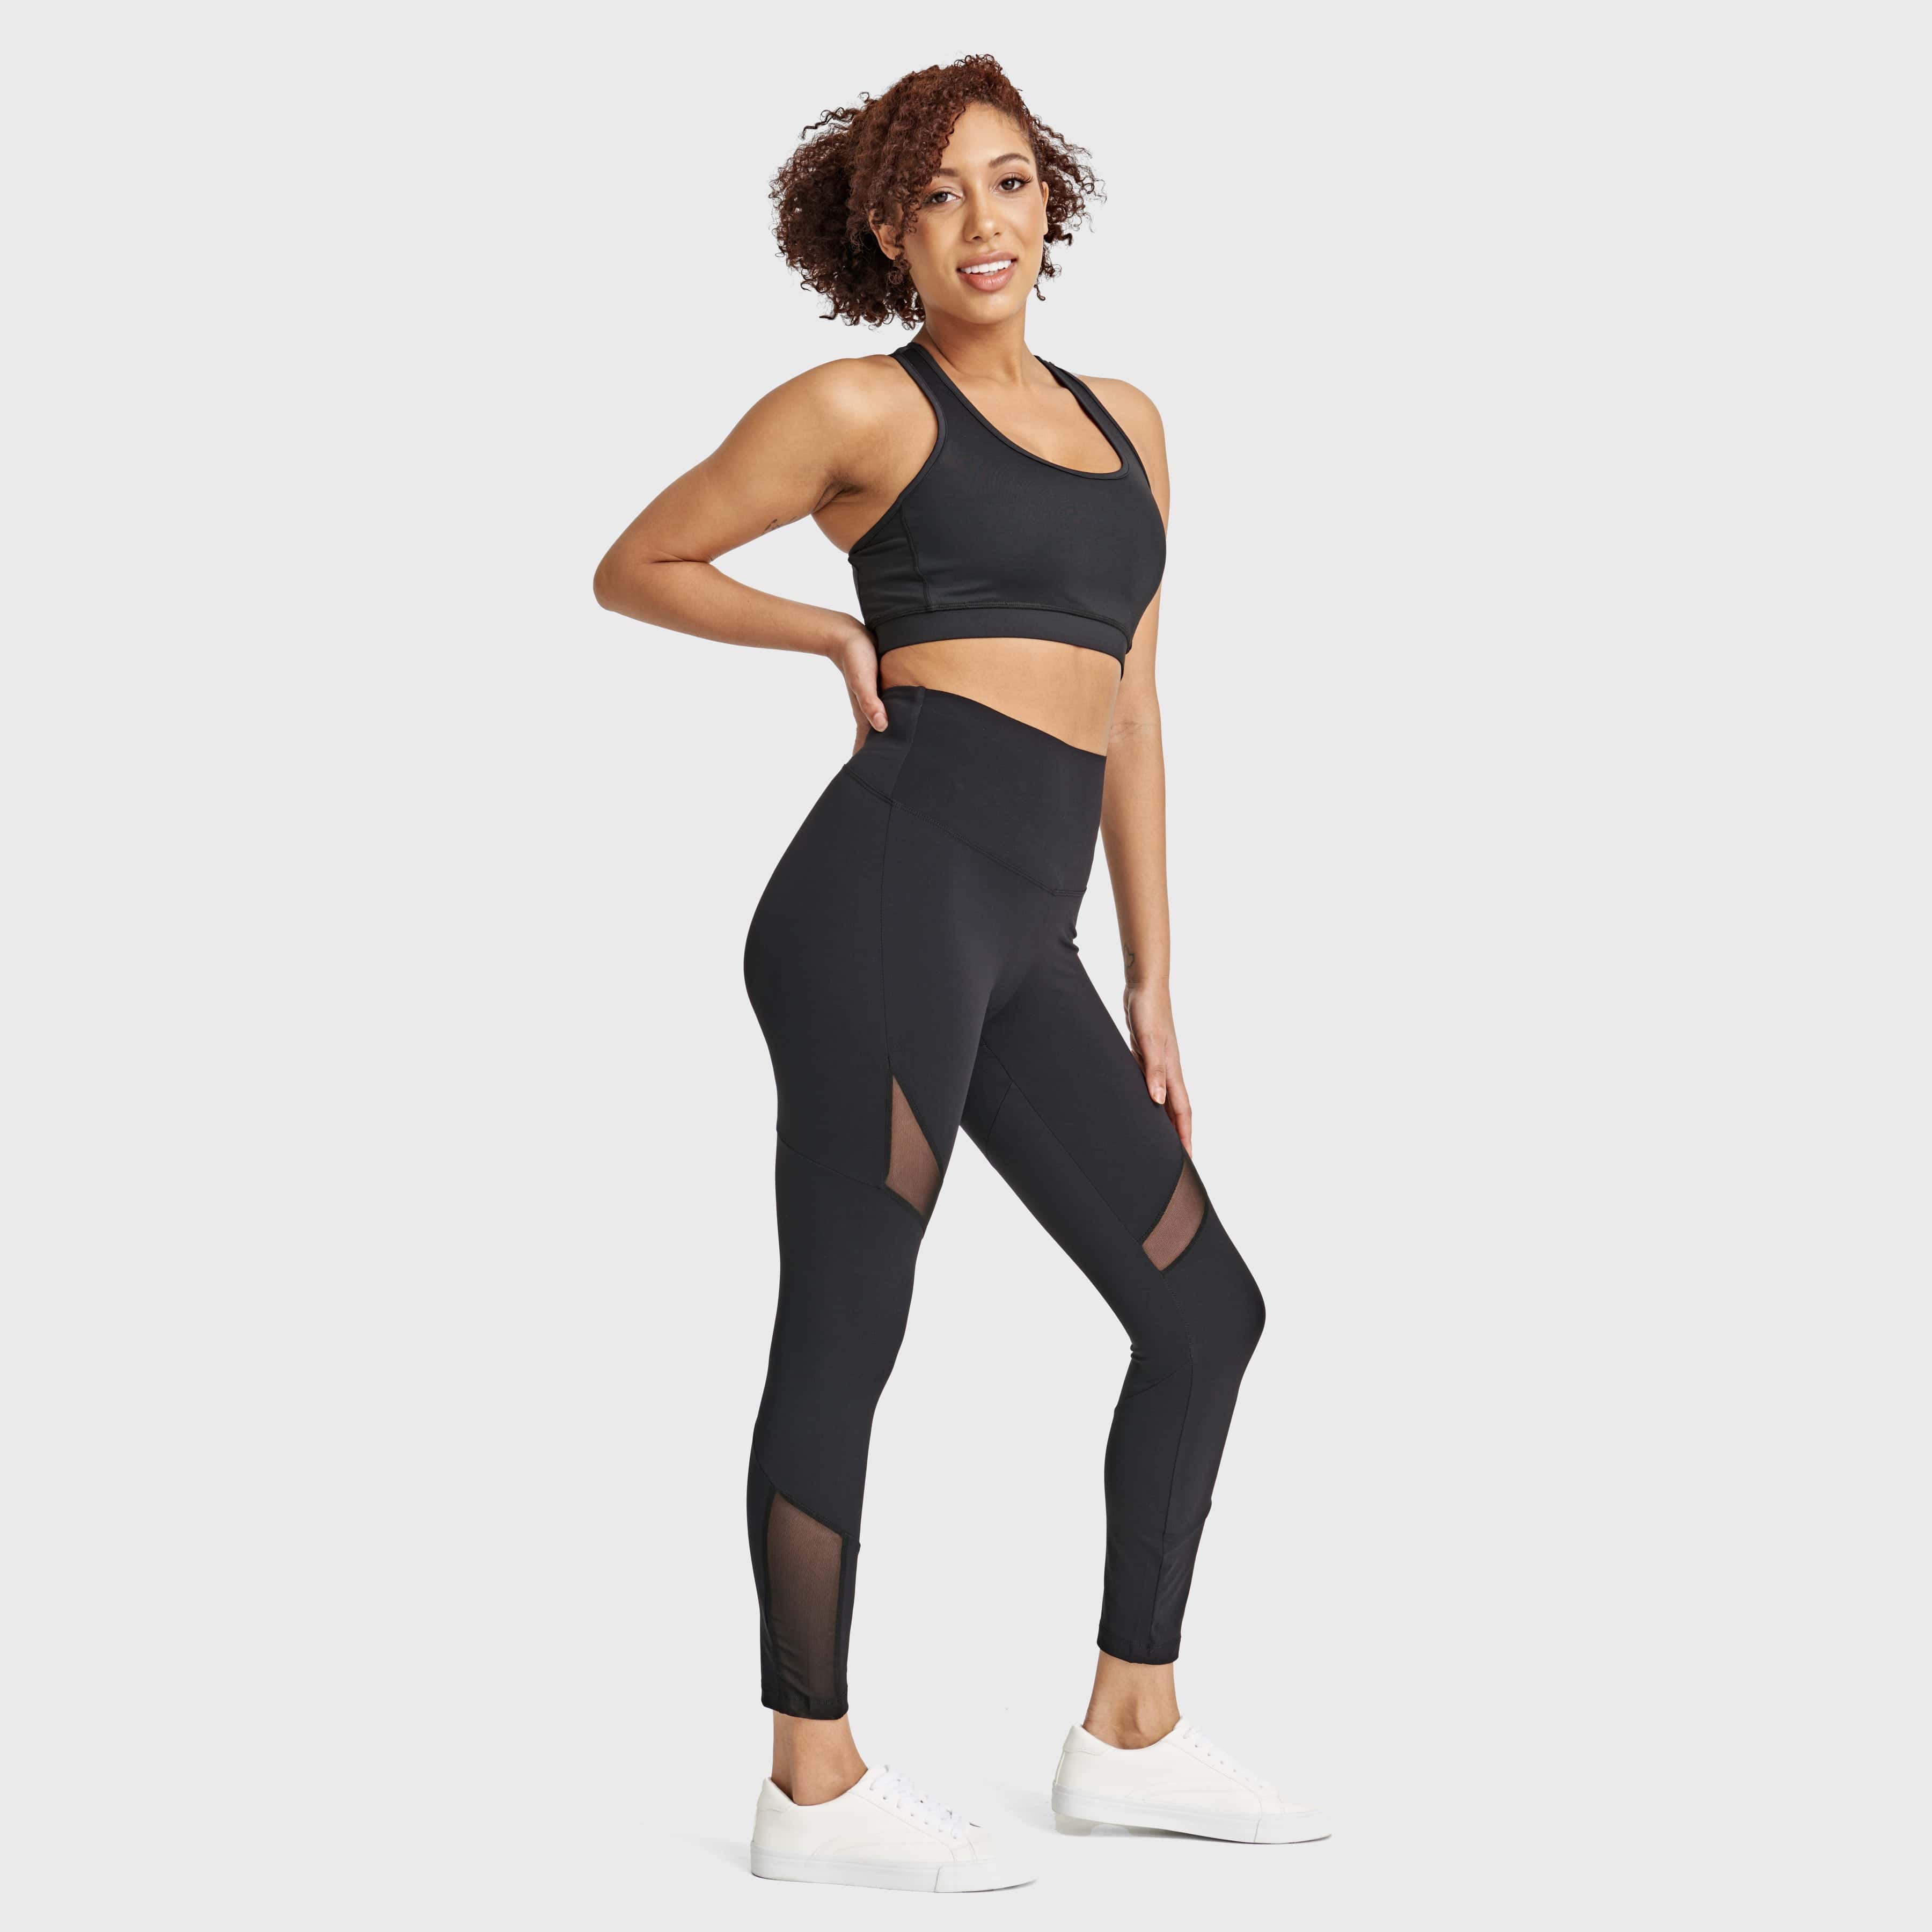 Superfit Diwo Pro With Mesh Detailing - High Waisted - 7/8 Length - Black 2